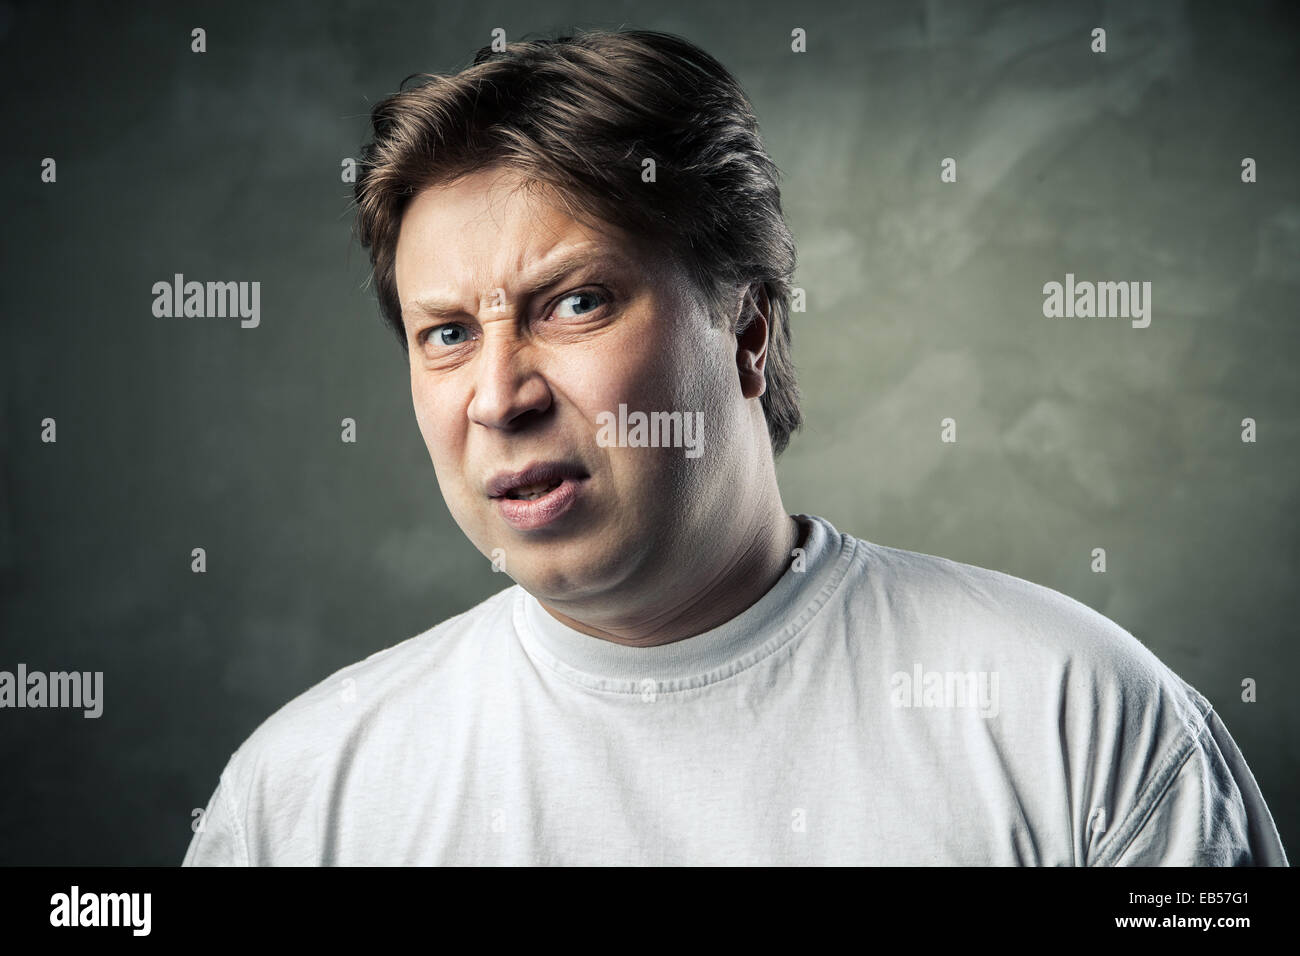 Man with disgusted expression over dark grey background Stock Photo